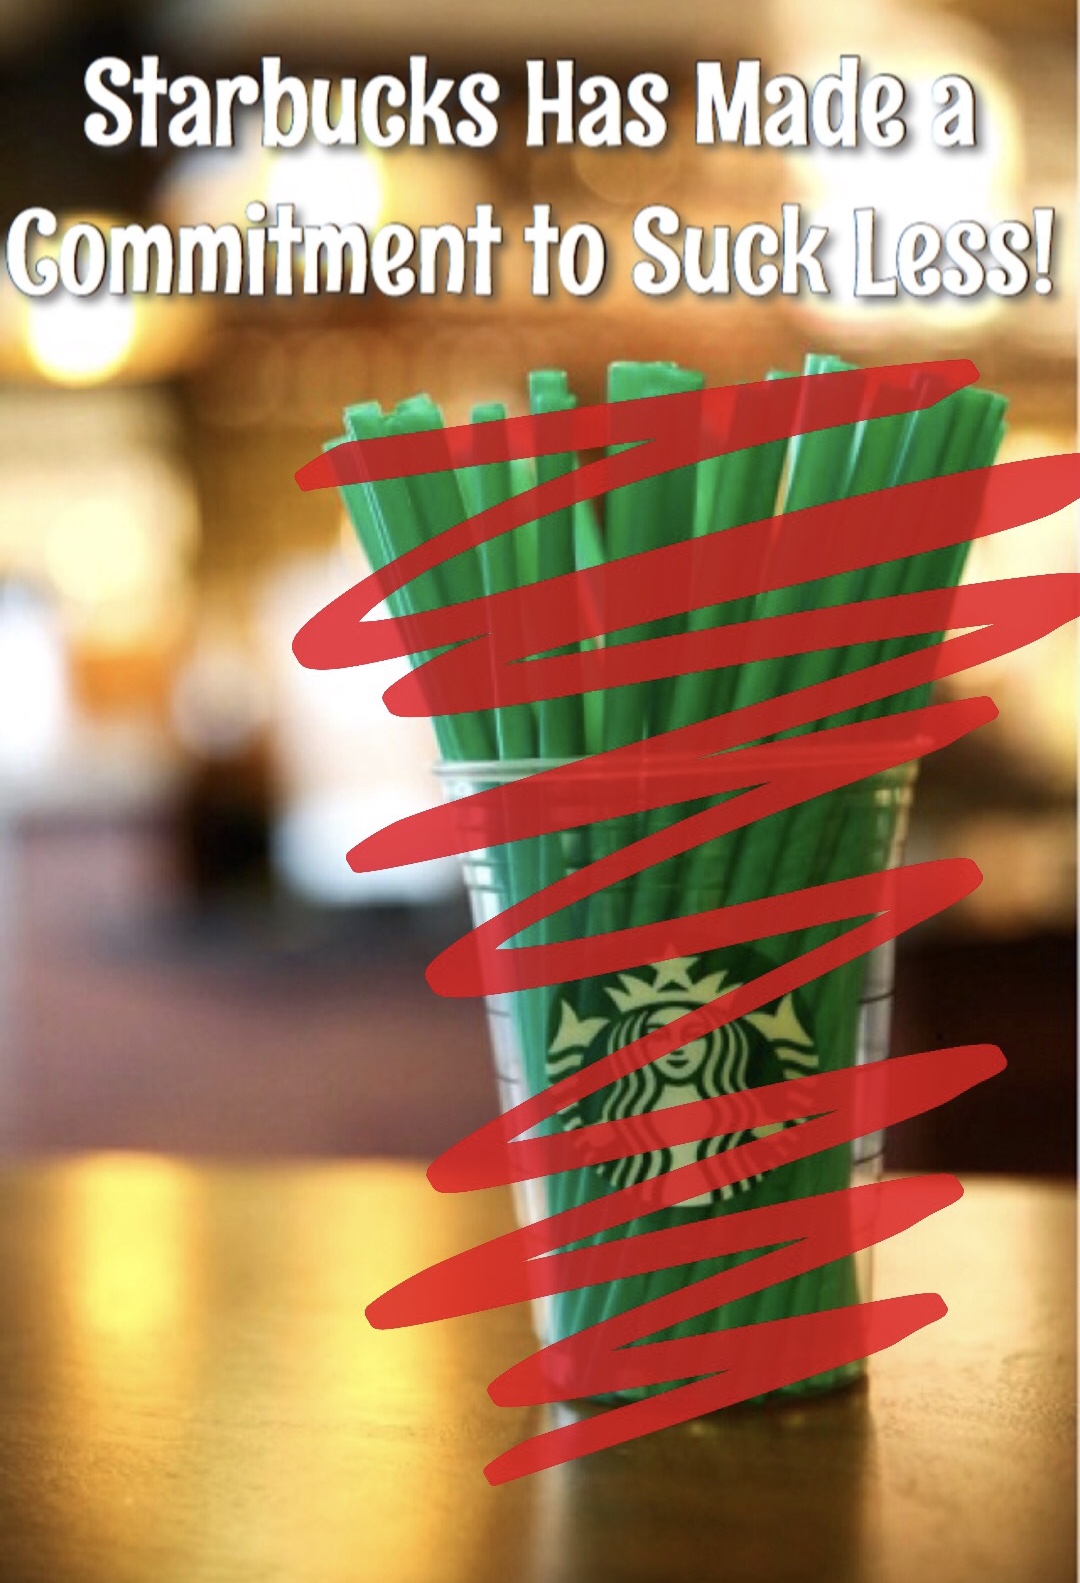 Starbucks Has Made a Commitment to Suck Less!